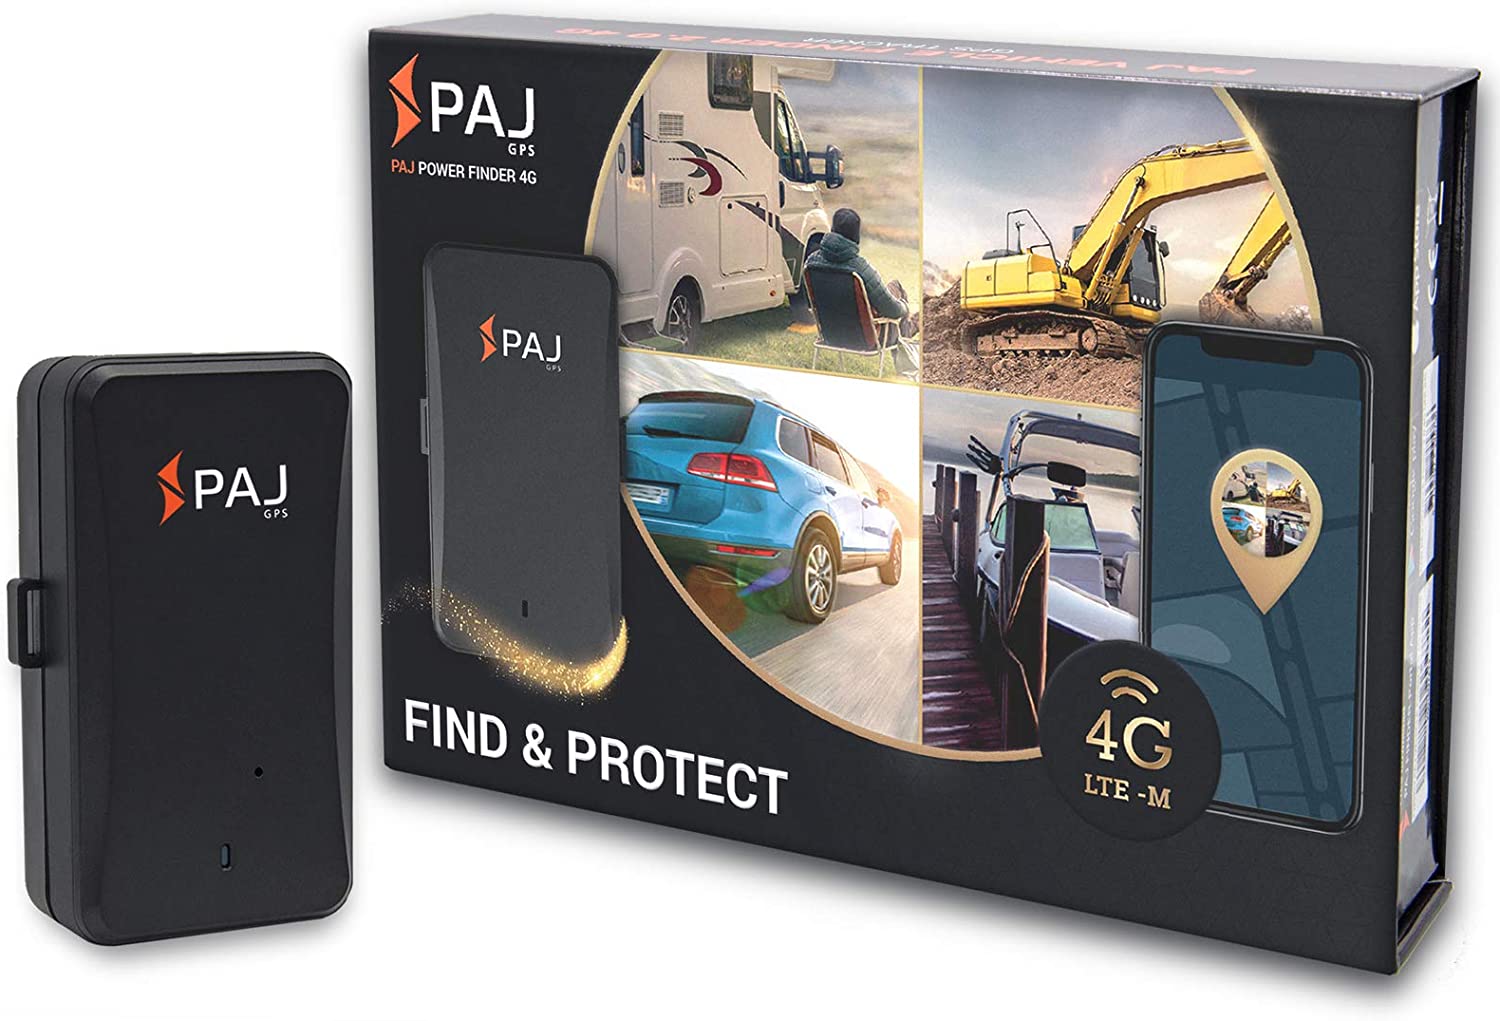 PAJ Power Finder 4G GPS - My Helpful Hints® Product Review